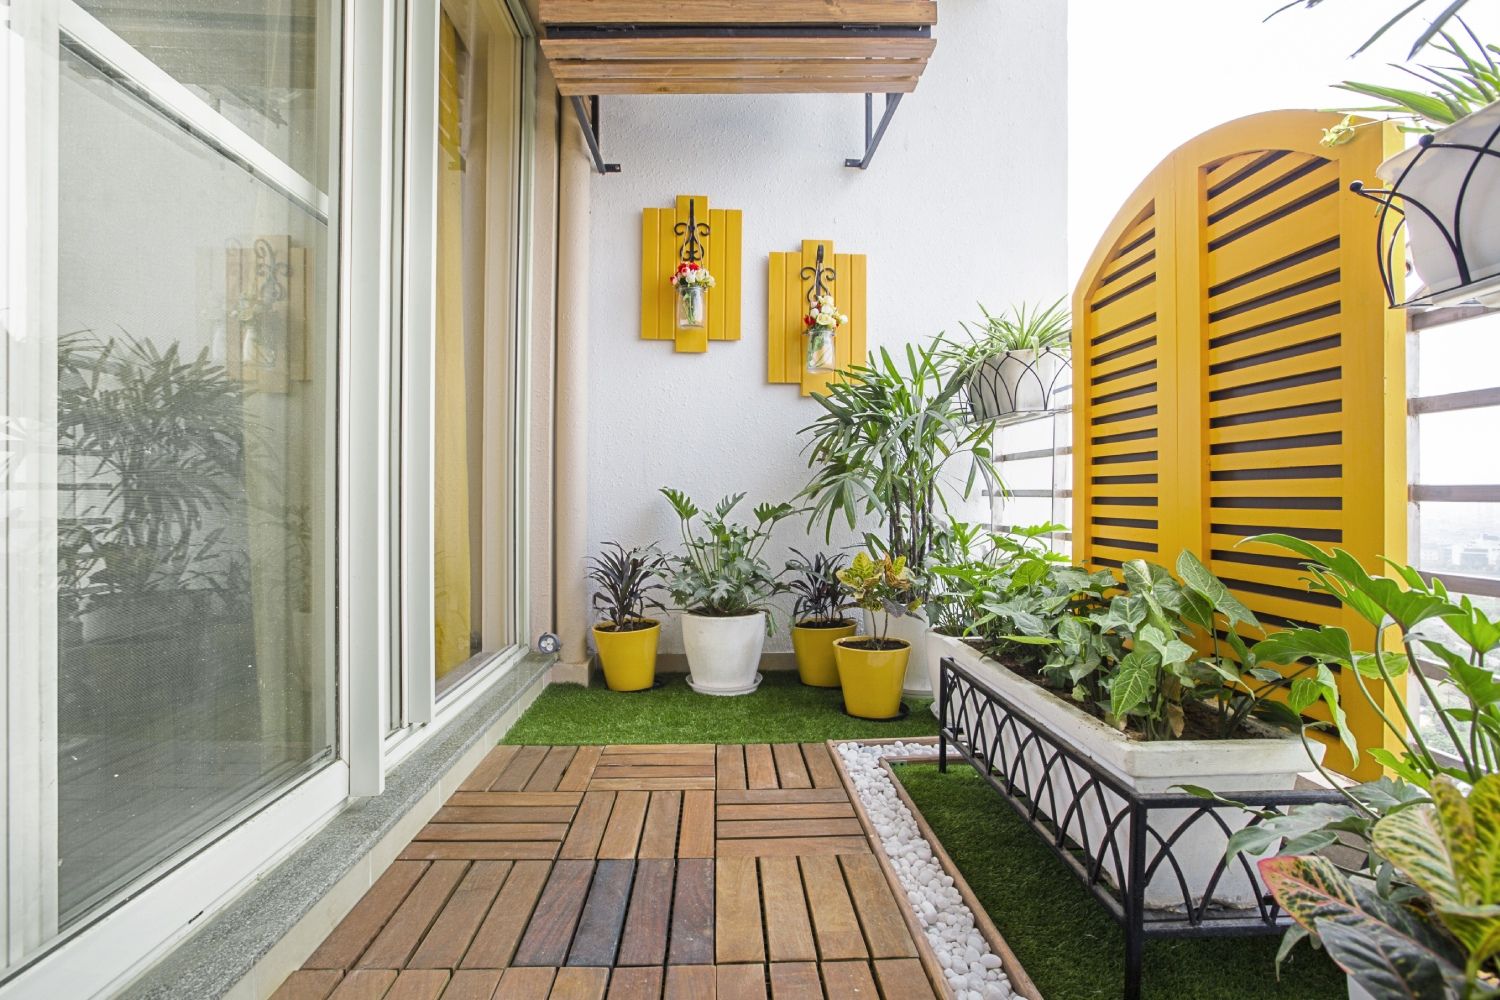 Tropical Balcony Design With Wooden Flooring And Yellow Accents